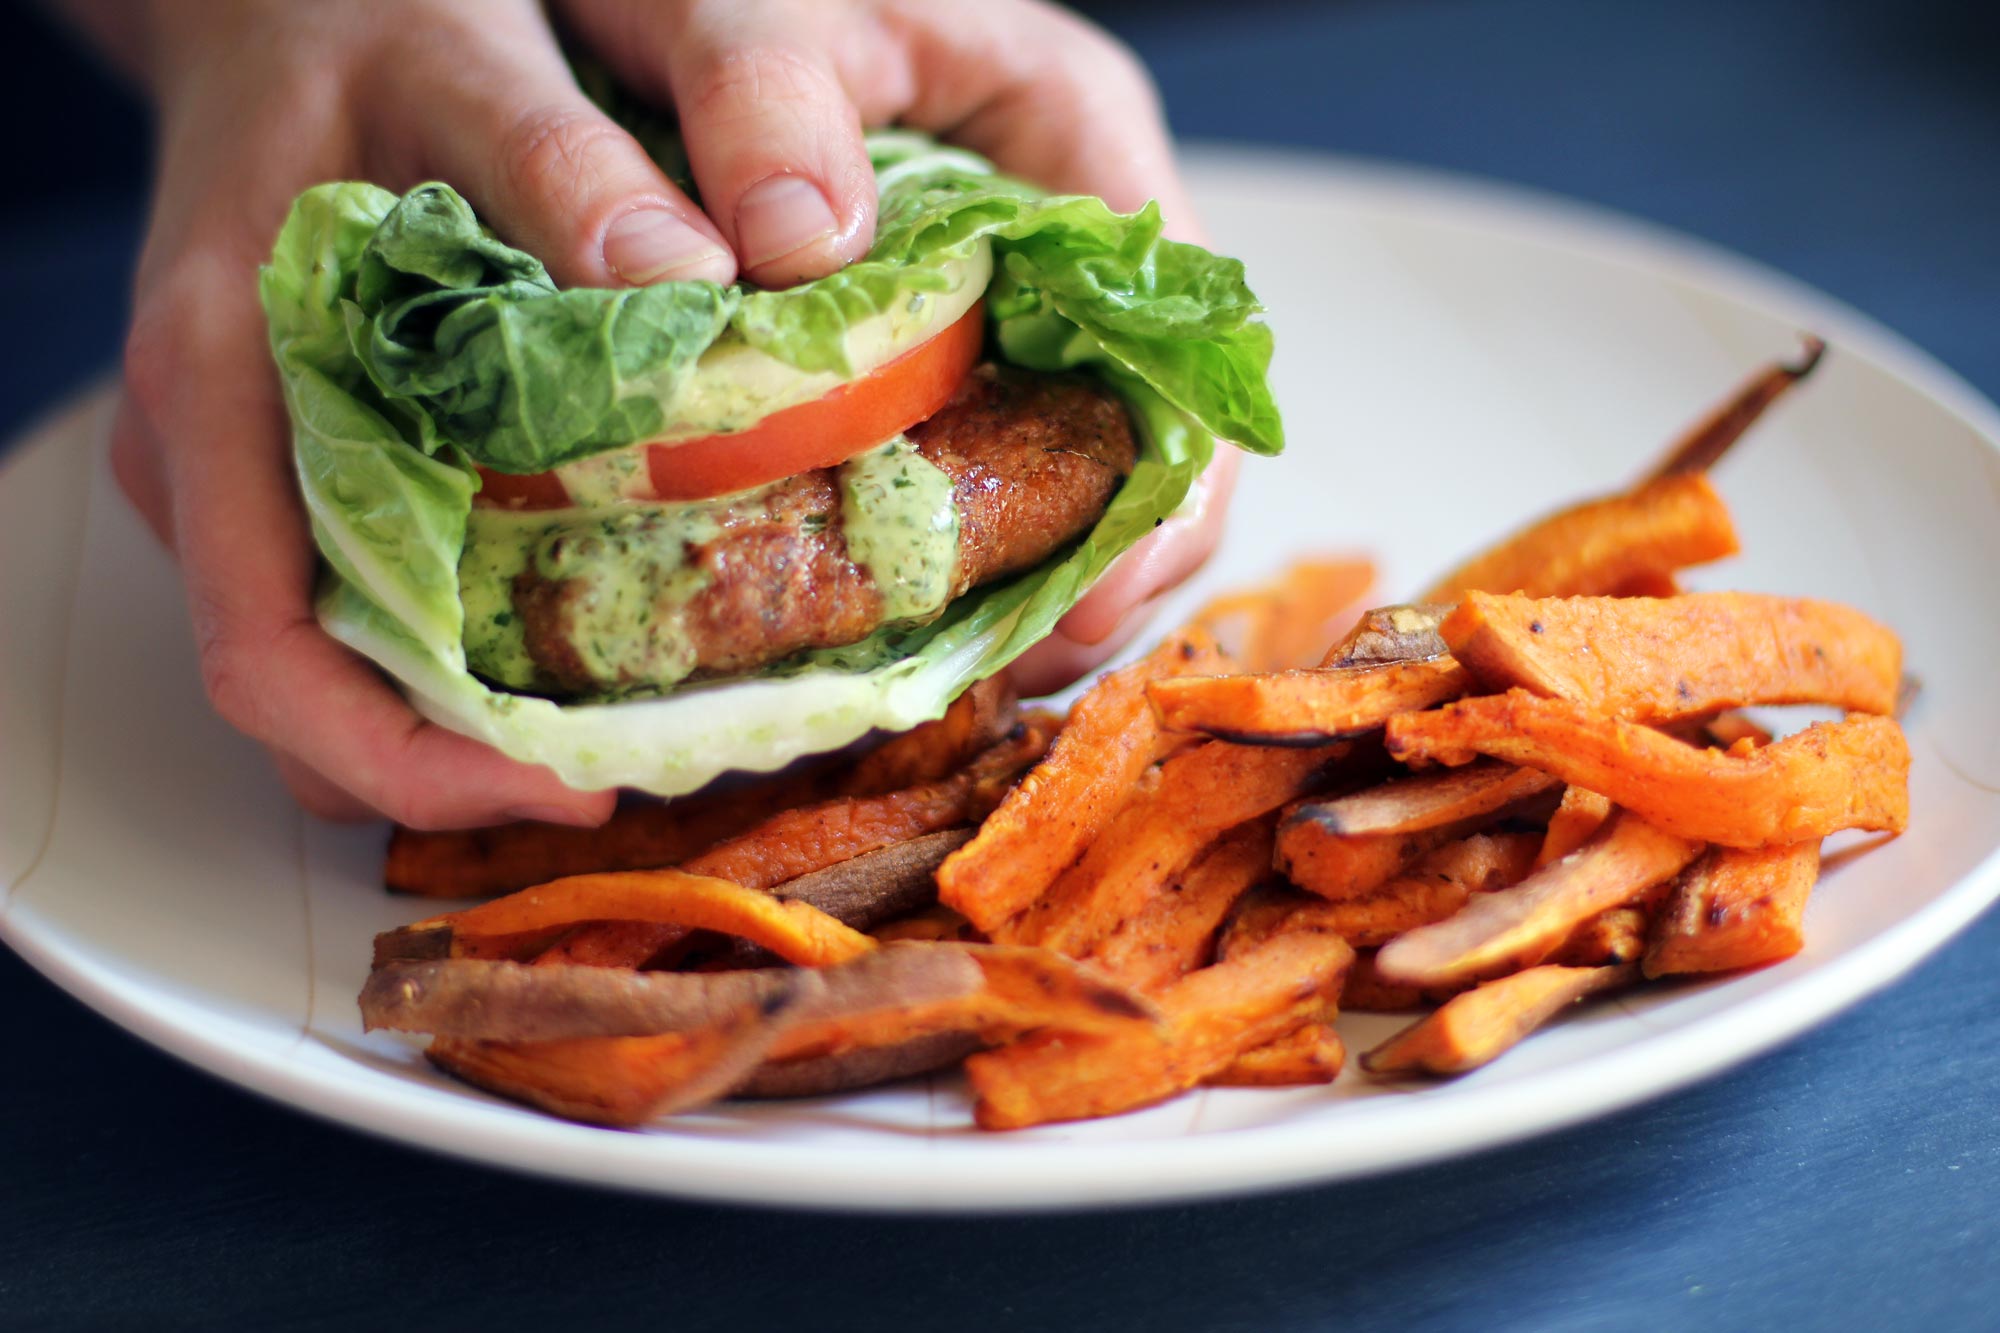 Red Thai Turkey Burgers with Cilantro Lime Aioli in a Napa Cabbage Wrap with sweet potato fries